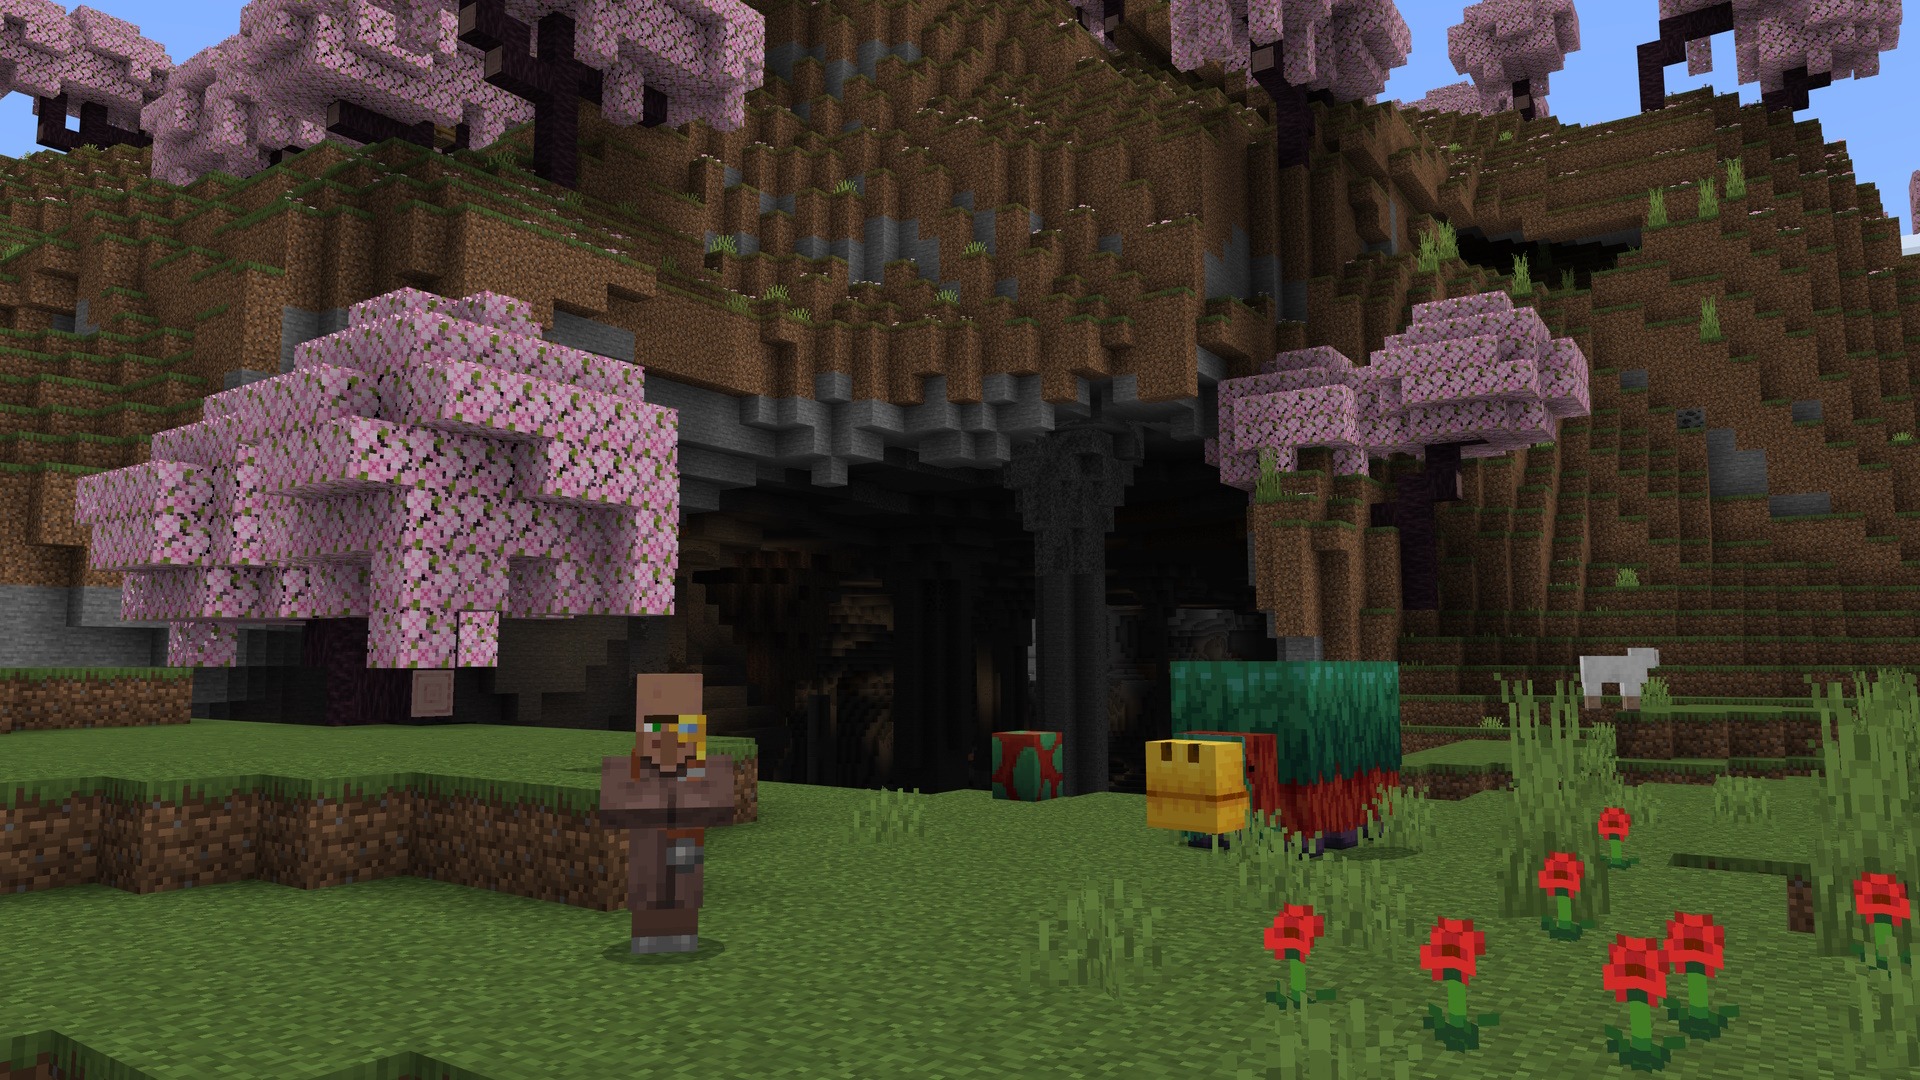 A Minecraft screenshot featuring a villager and a sniffer standing in front of a cave near a cherry grove